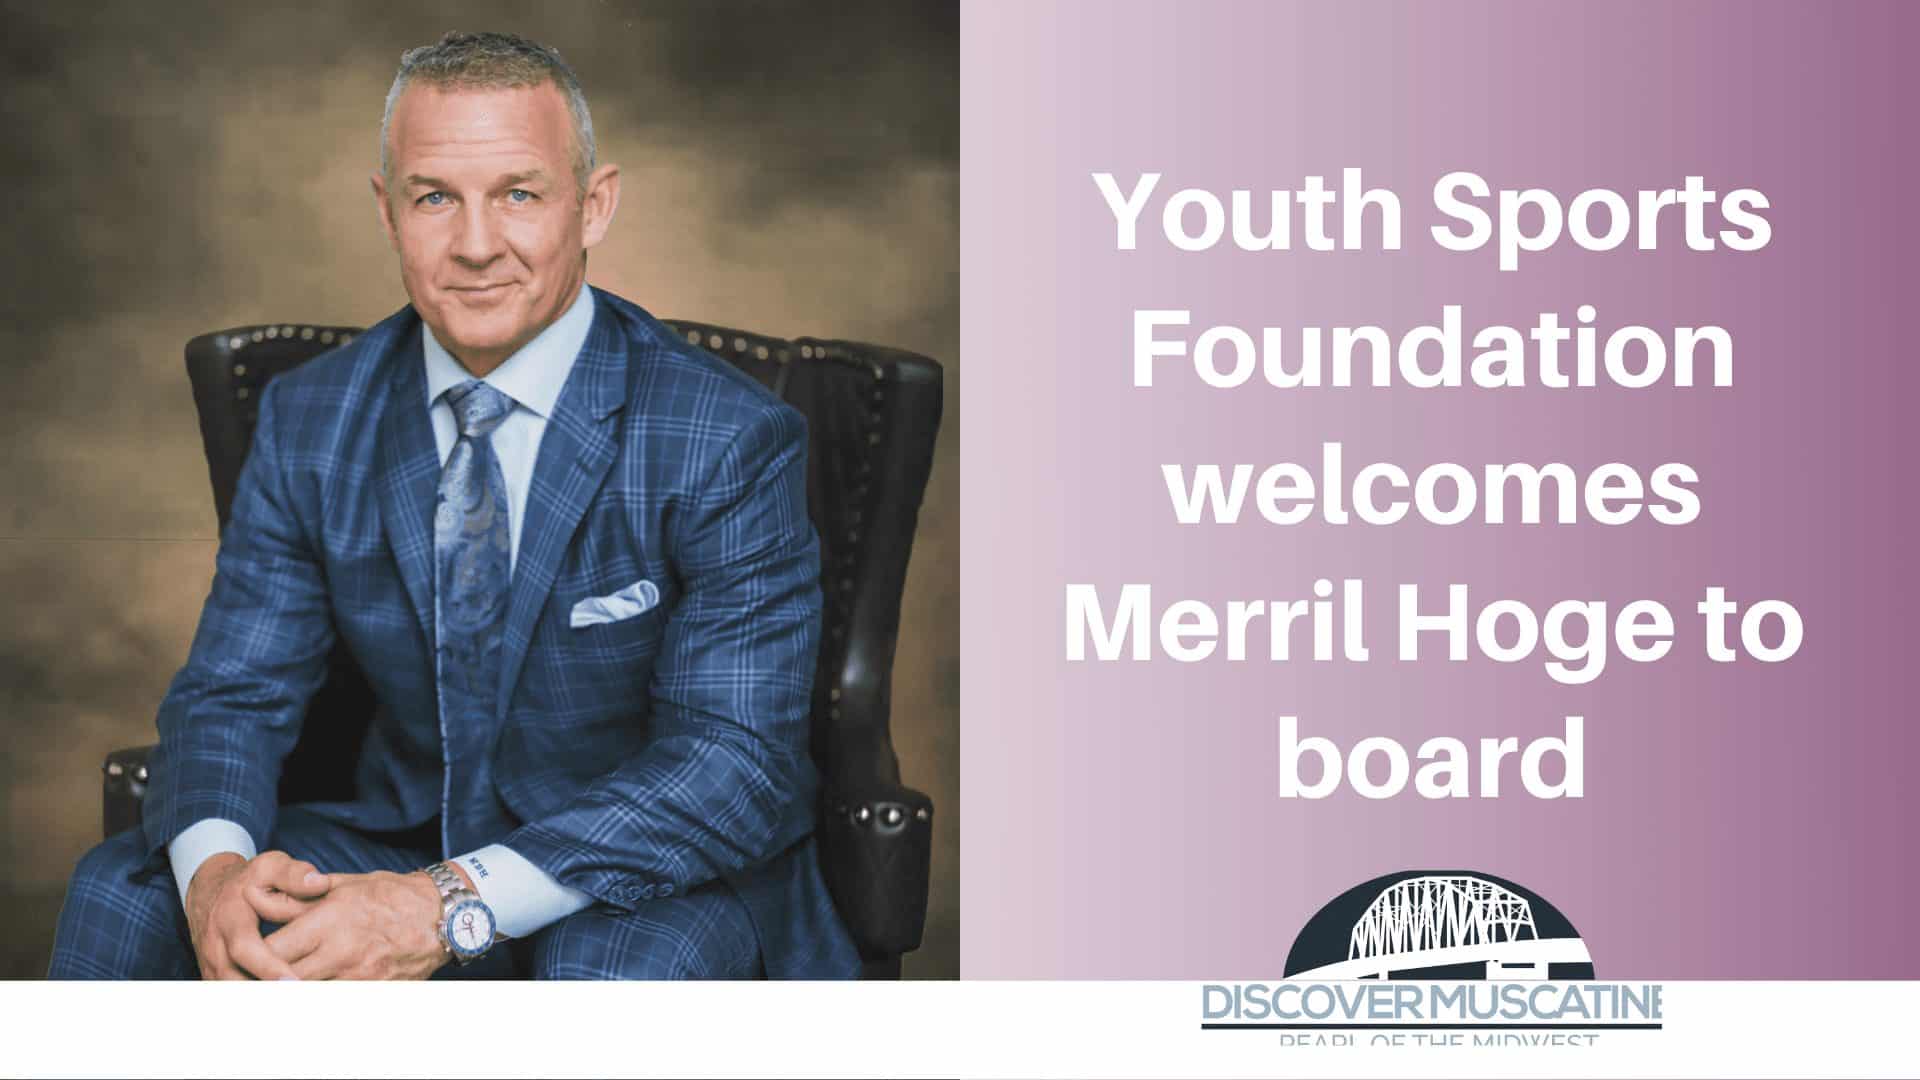 Youth Sports Foundation welcomes Merril Hoge to board